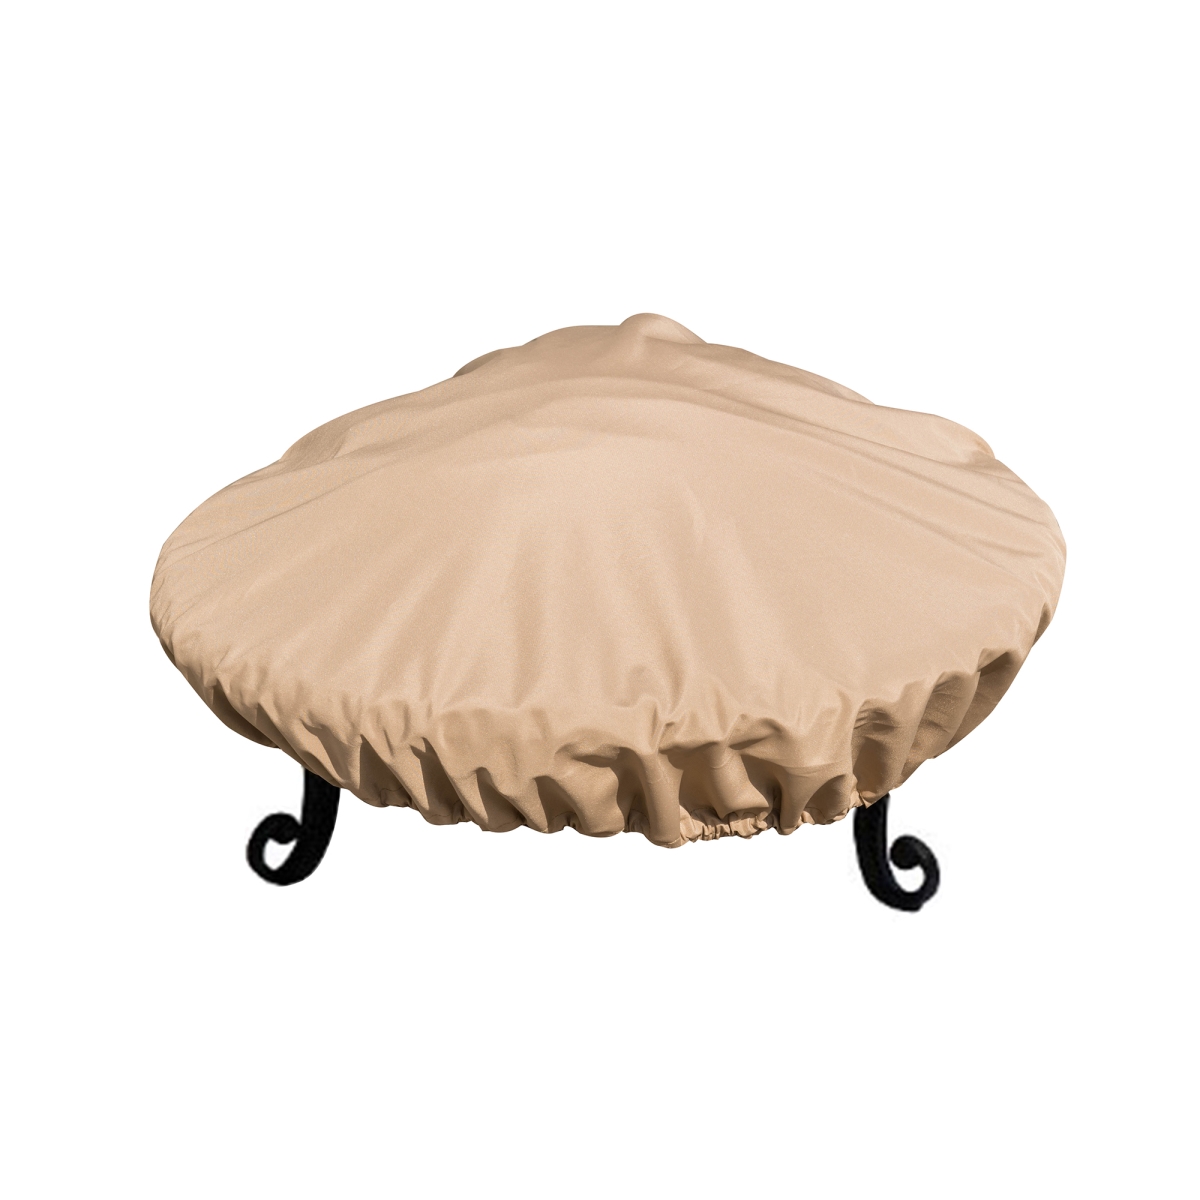 Nu570-37 34 - 37 In. Sandstone Fire Pit Cover For Fire Pits, Tan